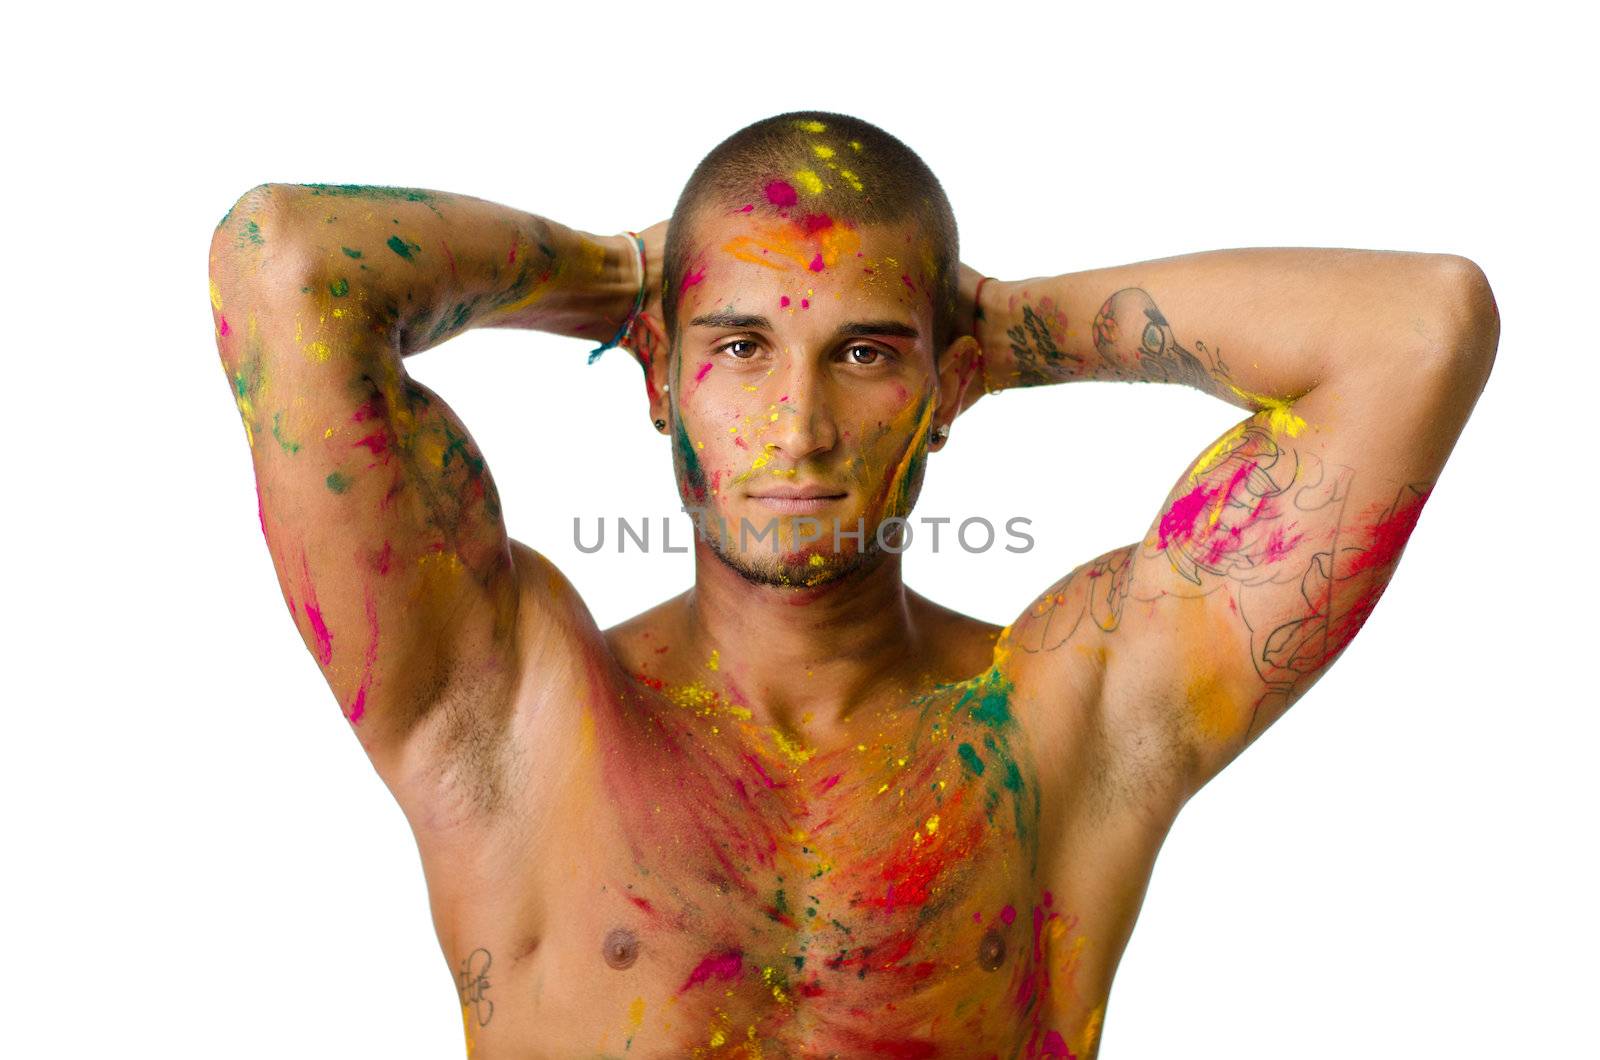 Attractive young man shirtless, skin painted all over with bright colors by artofphoto